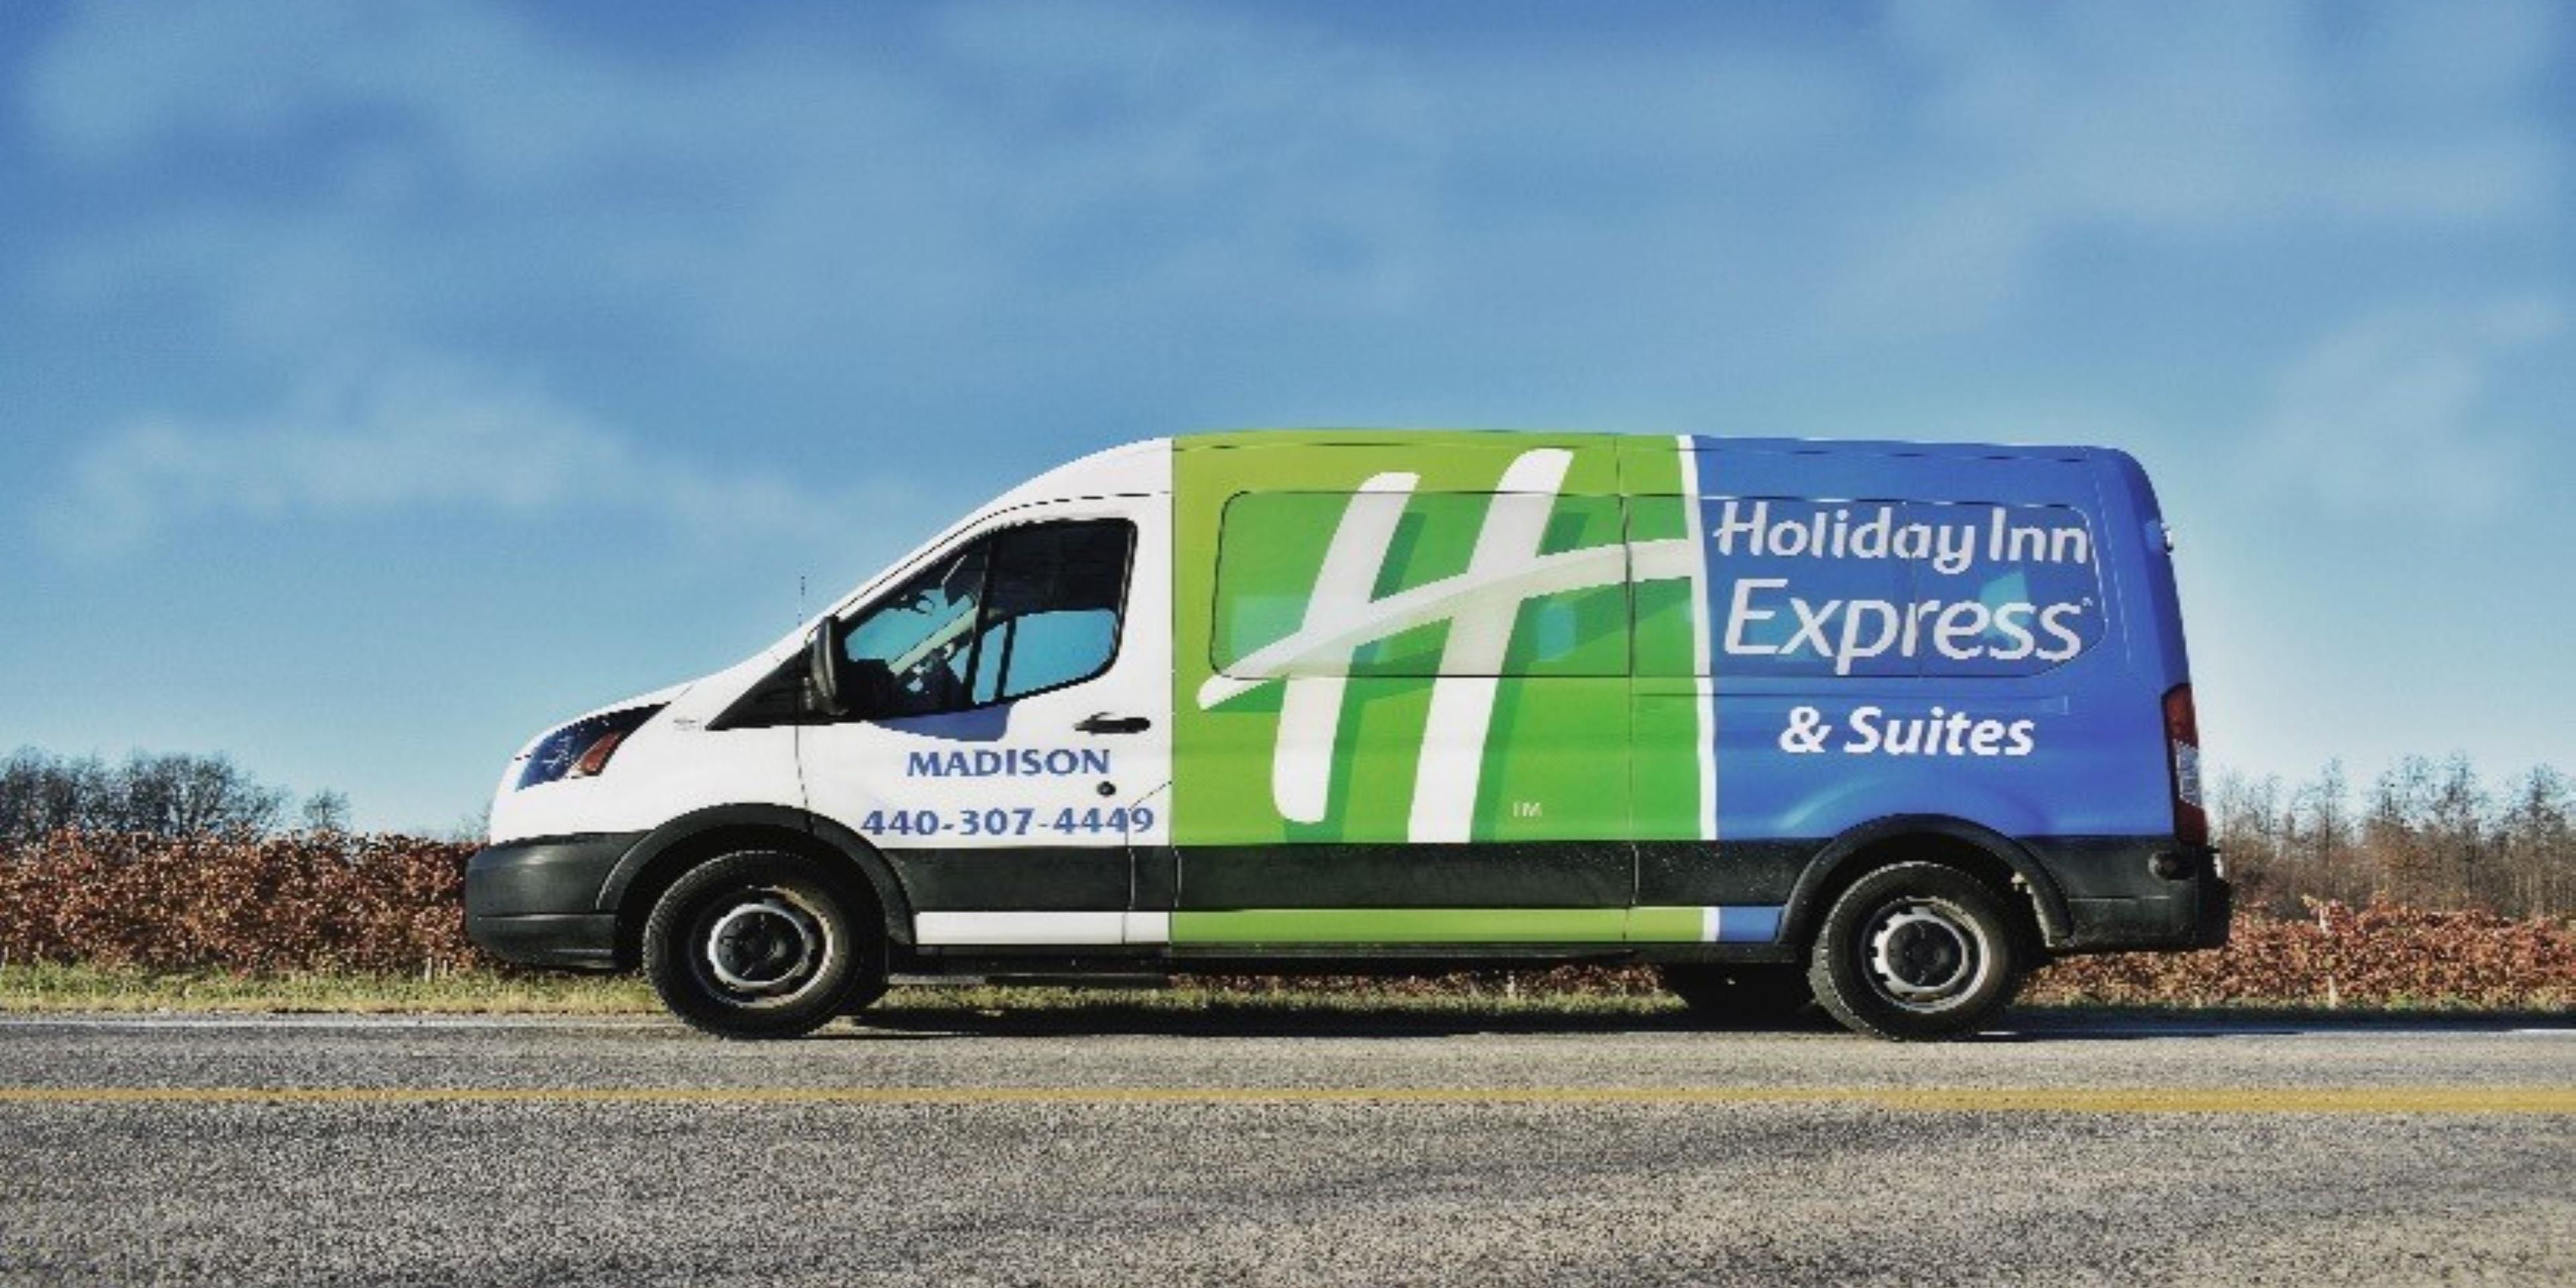 The Holiday Inn Express in Madison OH is located in the Grand River Valley,  25+ wineries, distilleries, & breweries.  Our hotels offers wine shuttles 7 days a week. We are here to drive, as you experience all the great wines Ohio's Wine Country has to offer. Reservations & advance deposits are required. More information please call hotel. 